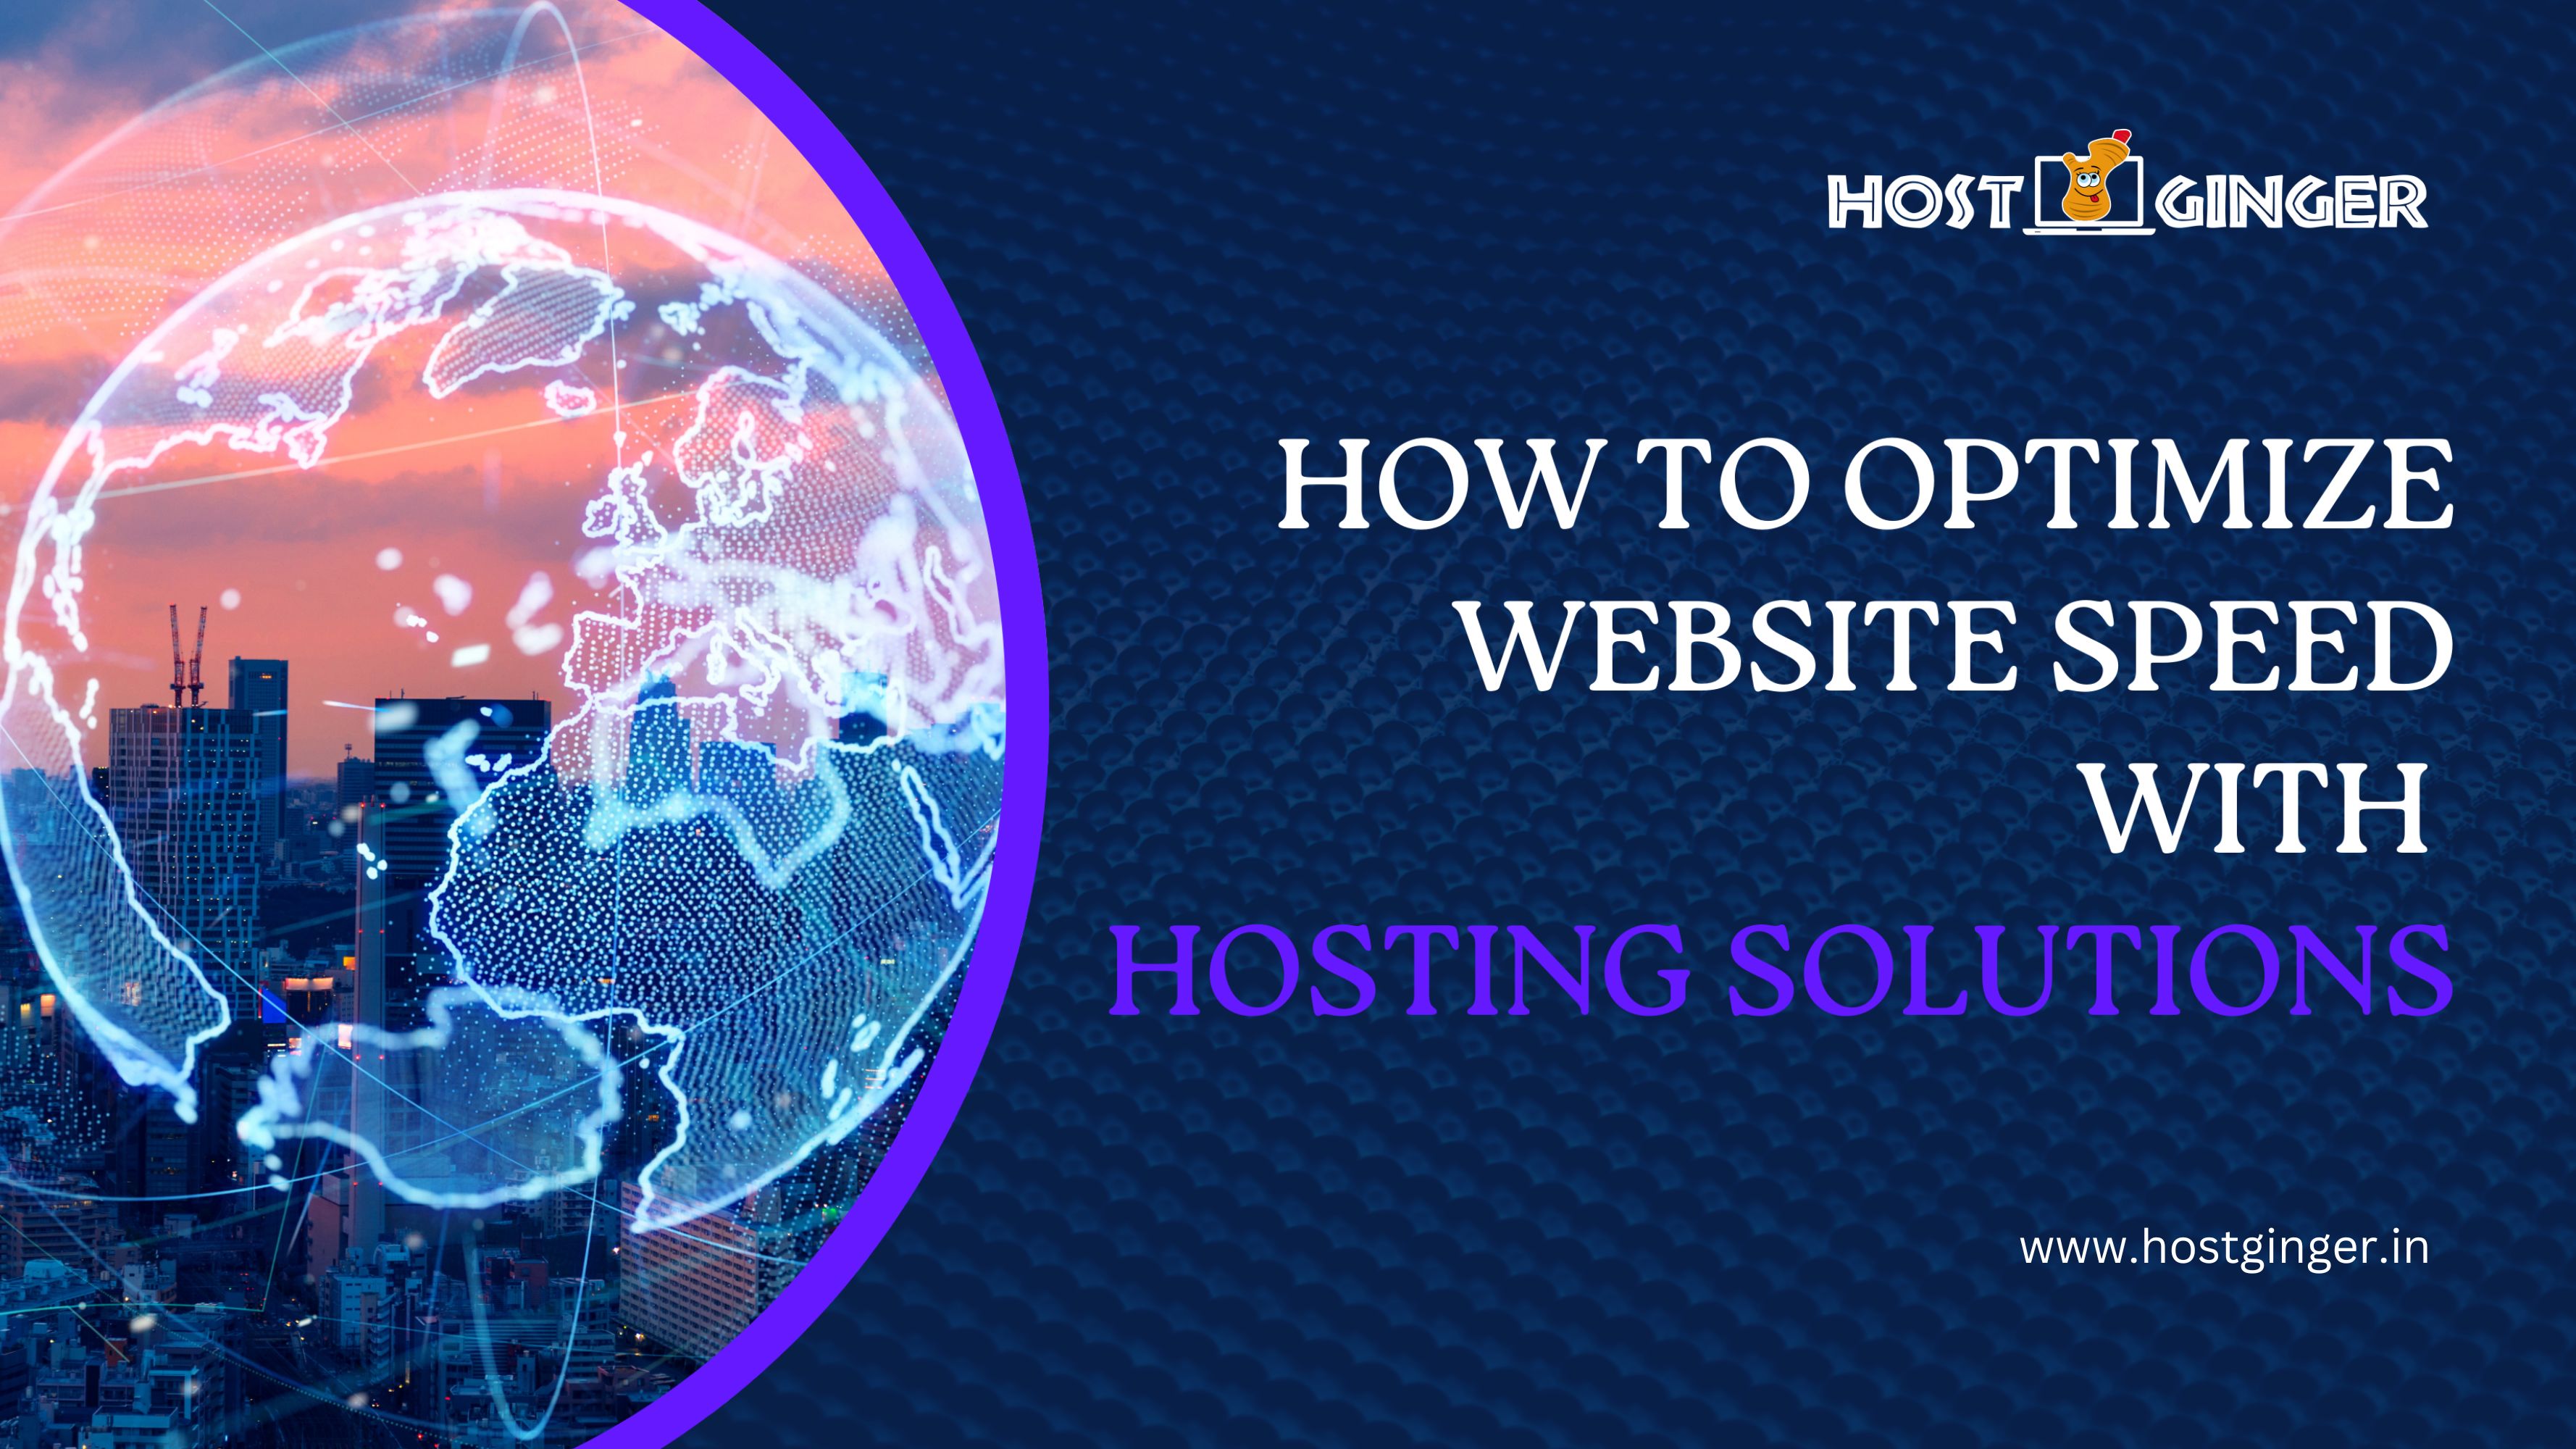 How to Optimize Website Speed with Hosting Solutions